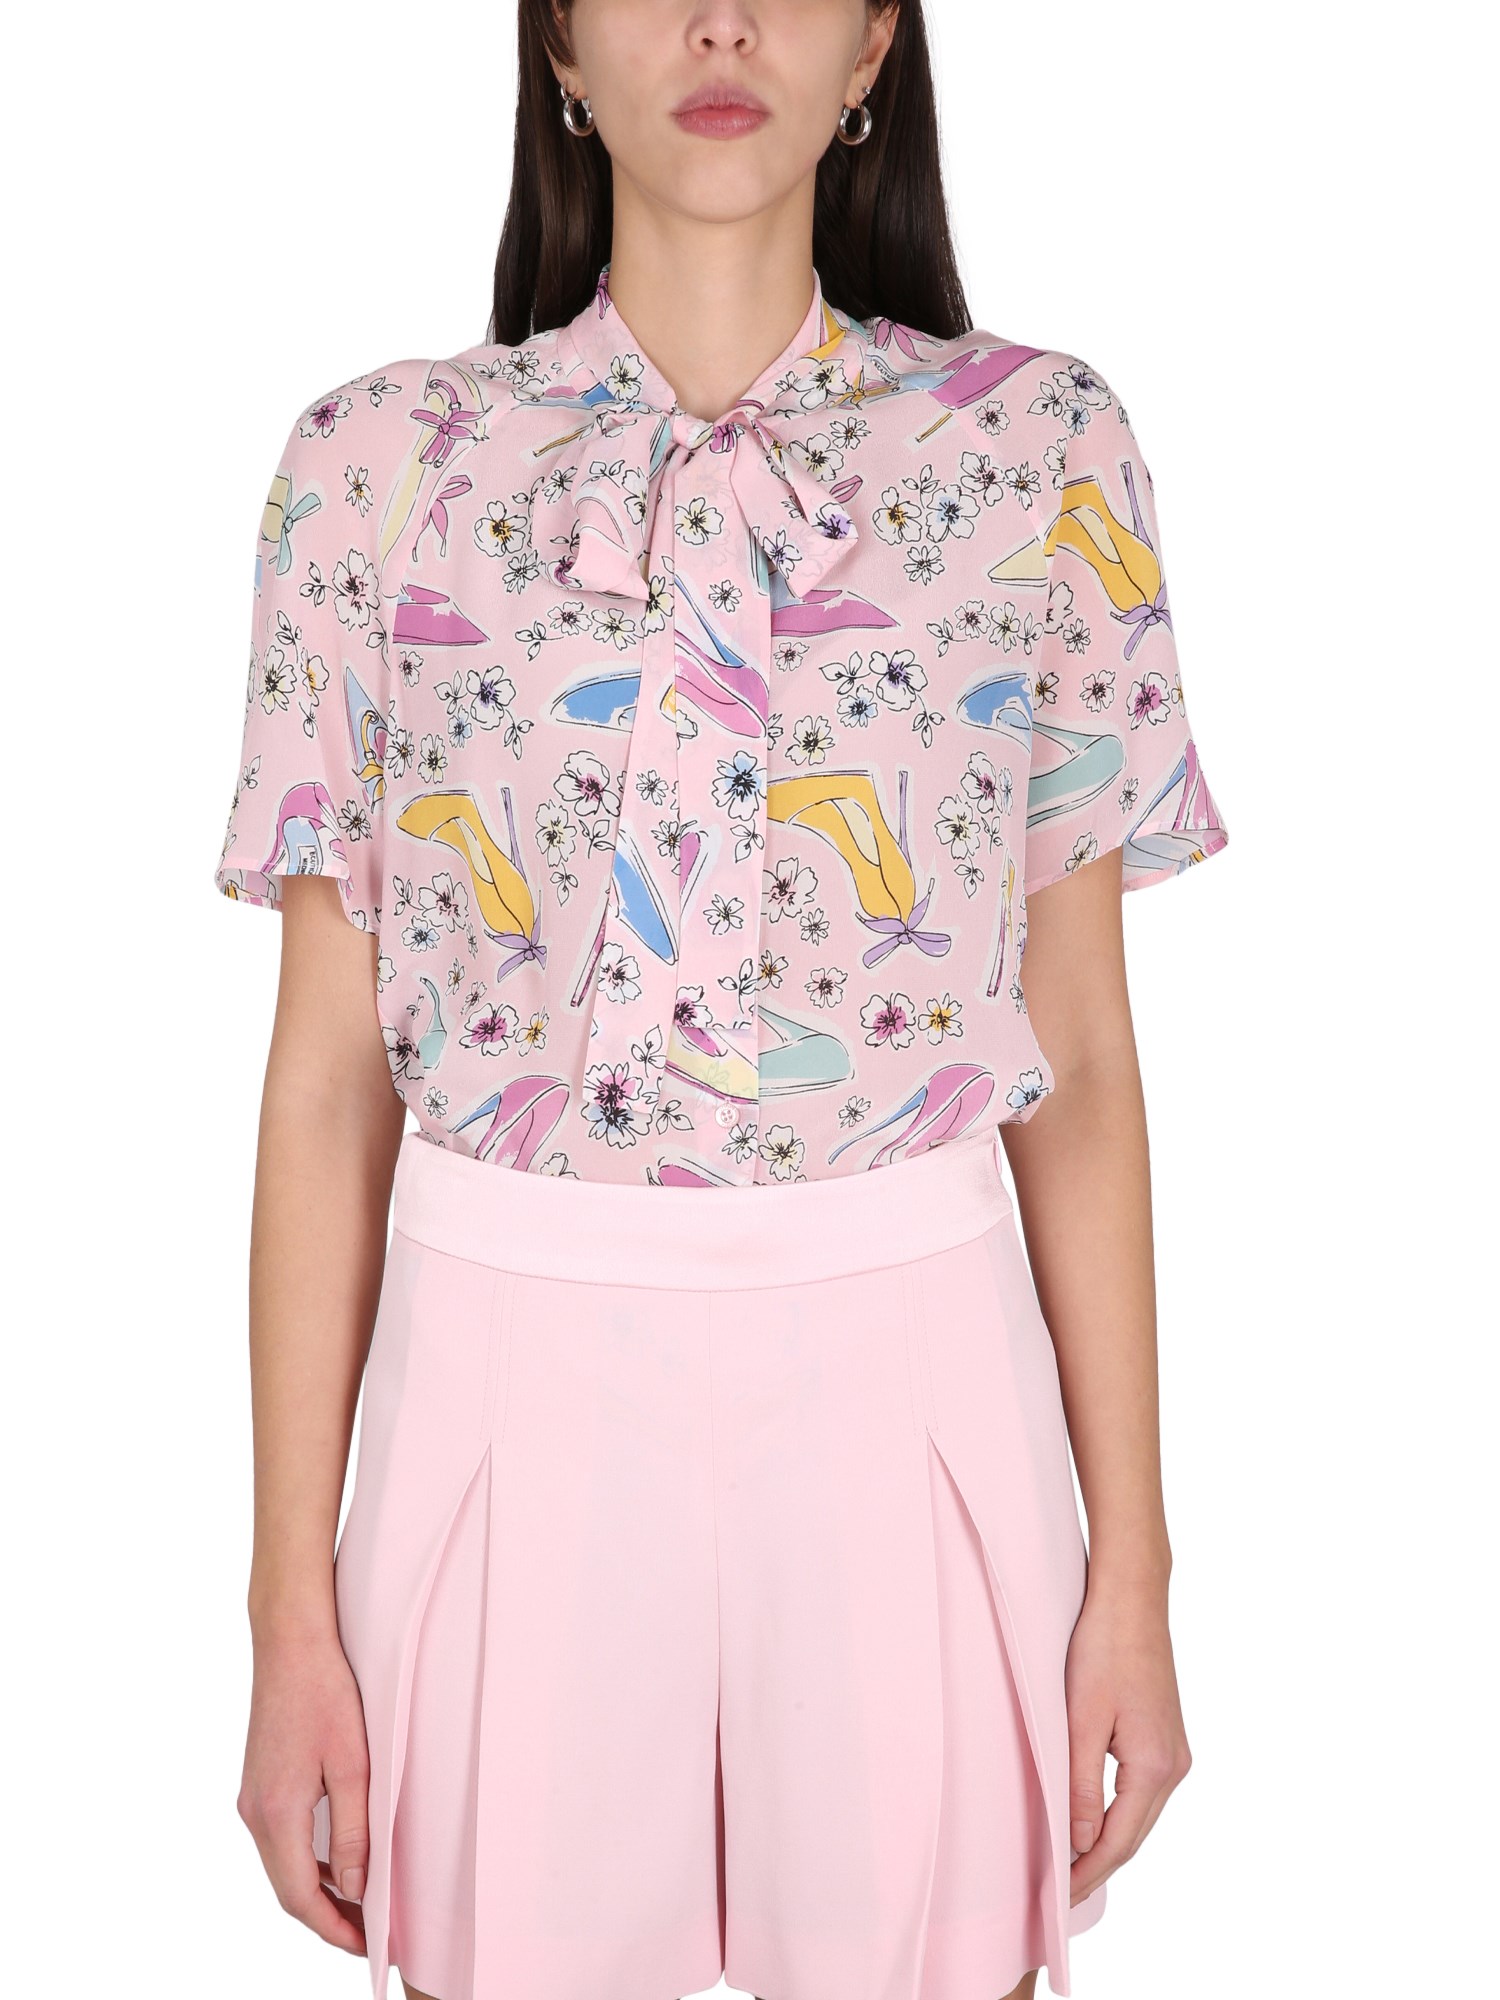 Boutique Moschino boutique moschino "heels and flowers" shirt